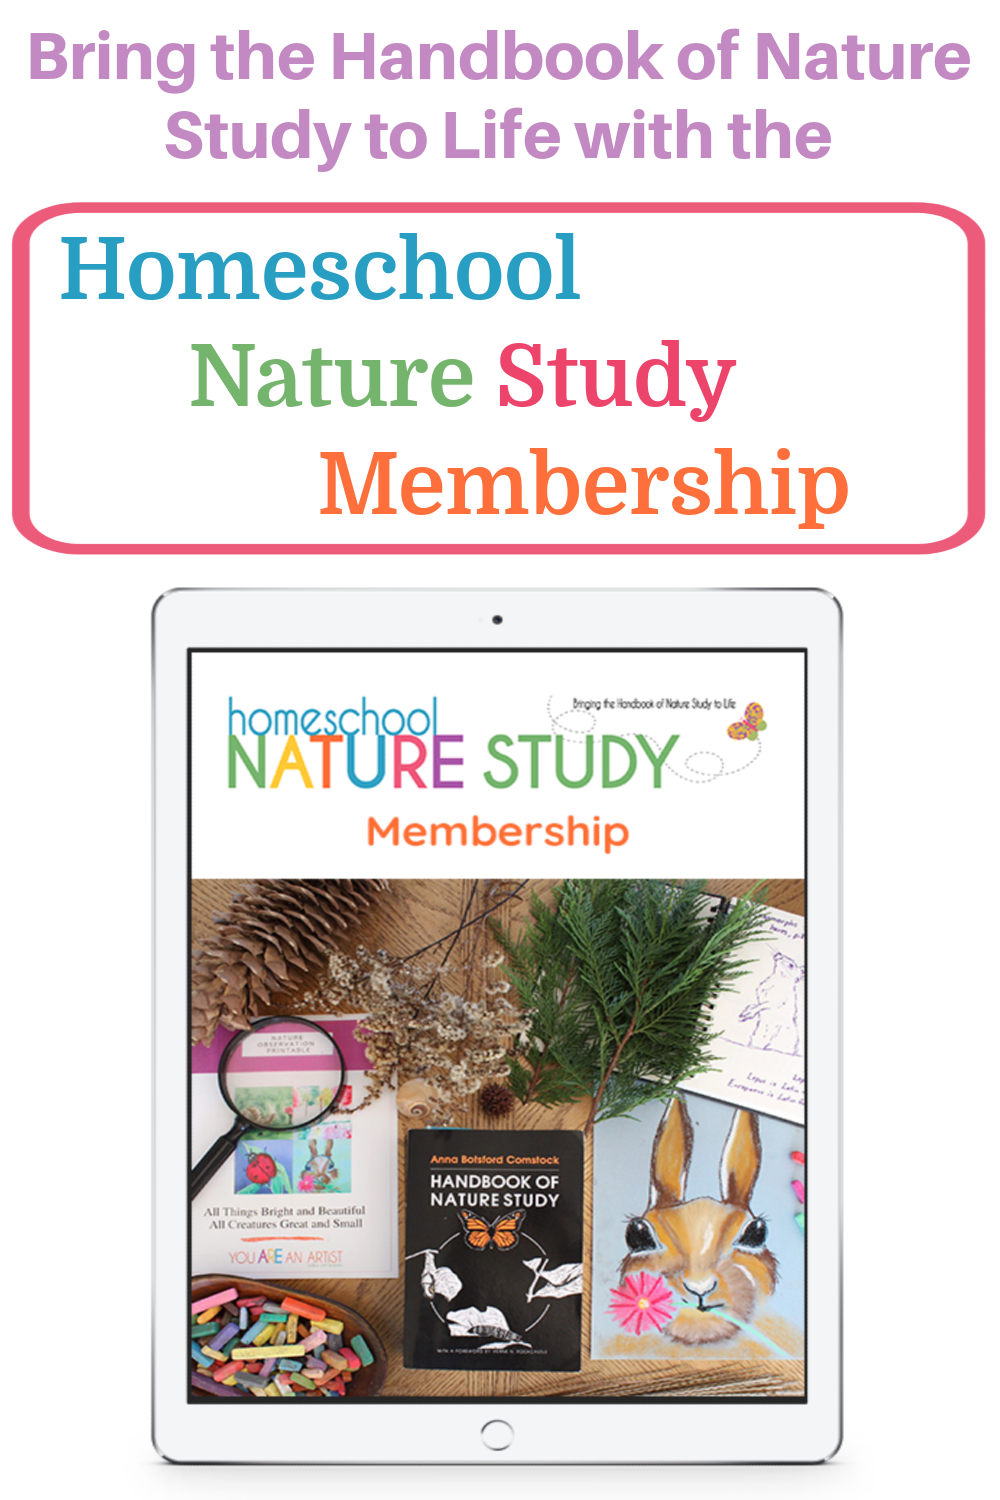 Check out the NEW Homeschool Nature Study website and membership! Where the Handbook of Nature Study is brought to life!